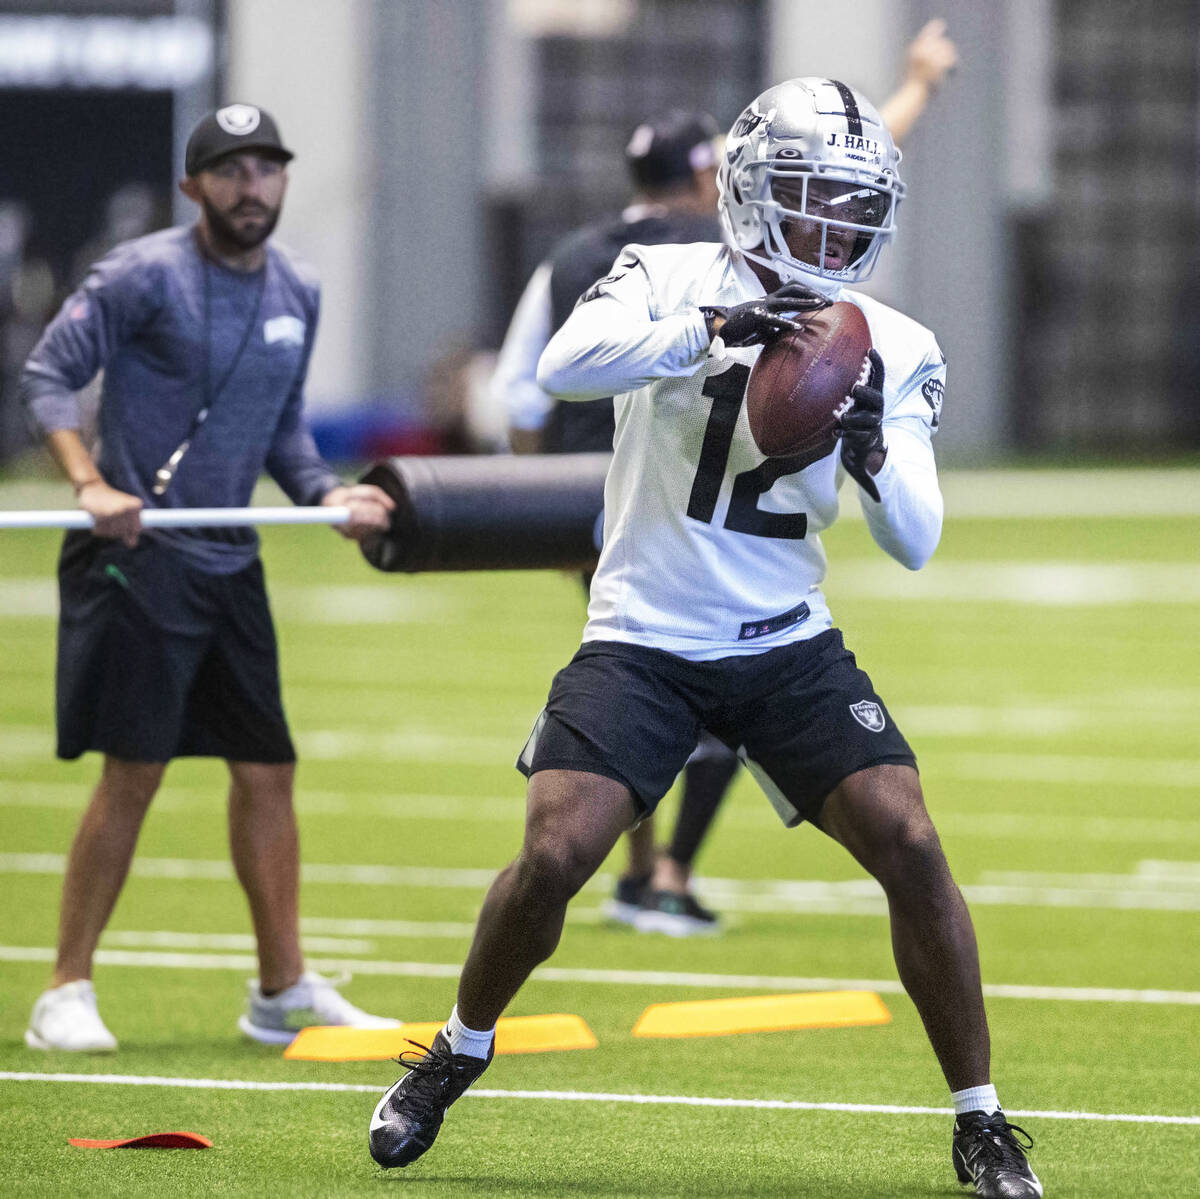 Raiders wide receiver Justin Hall (12) makes a catch during the team’s training camp pra ...